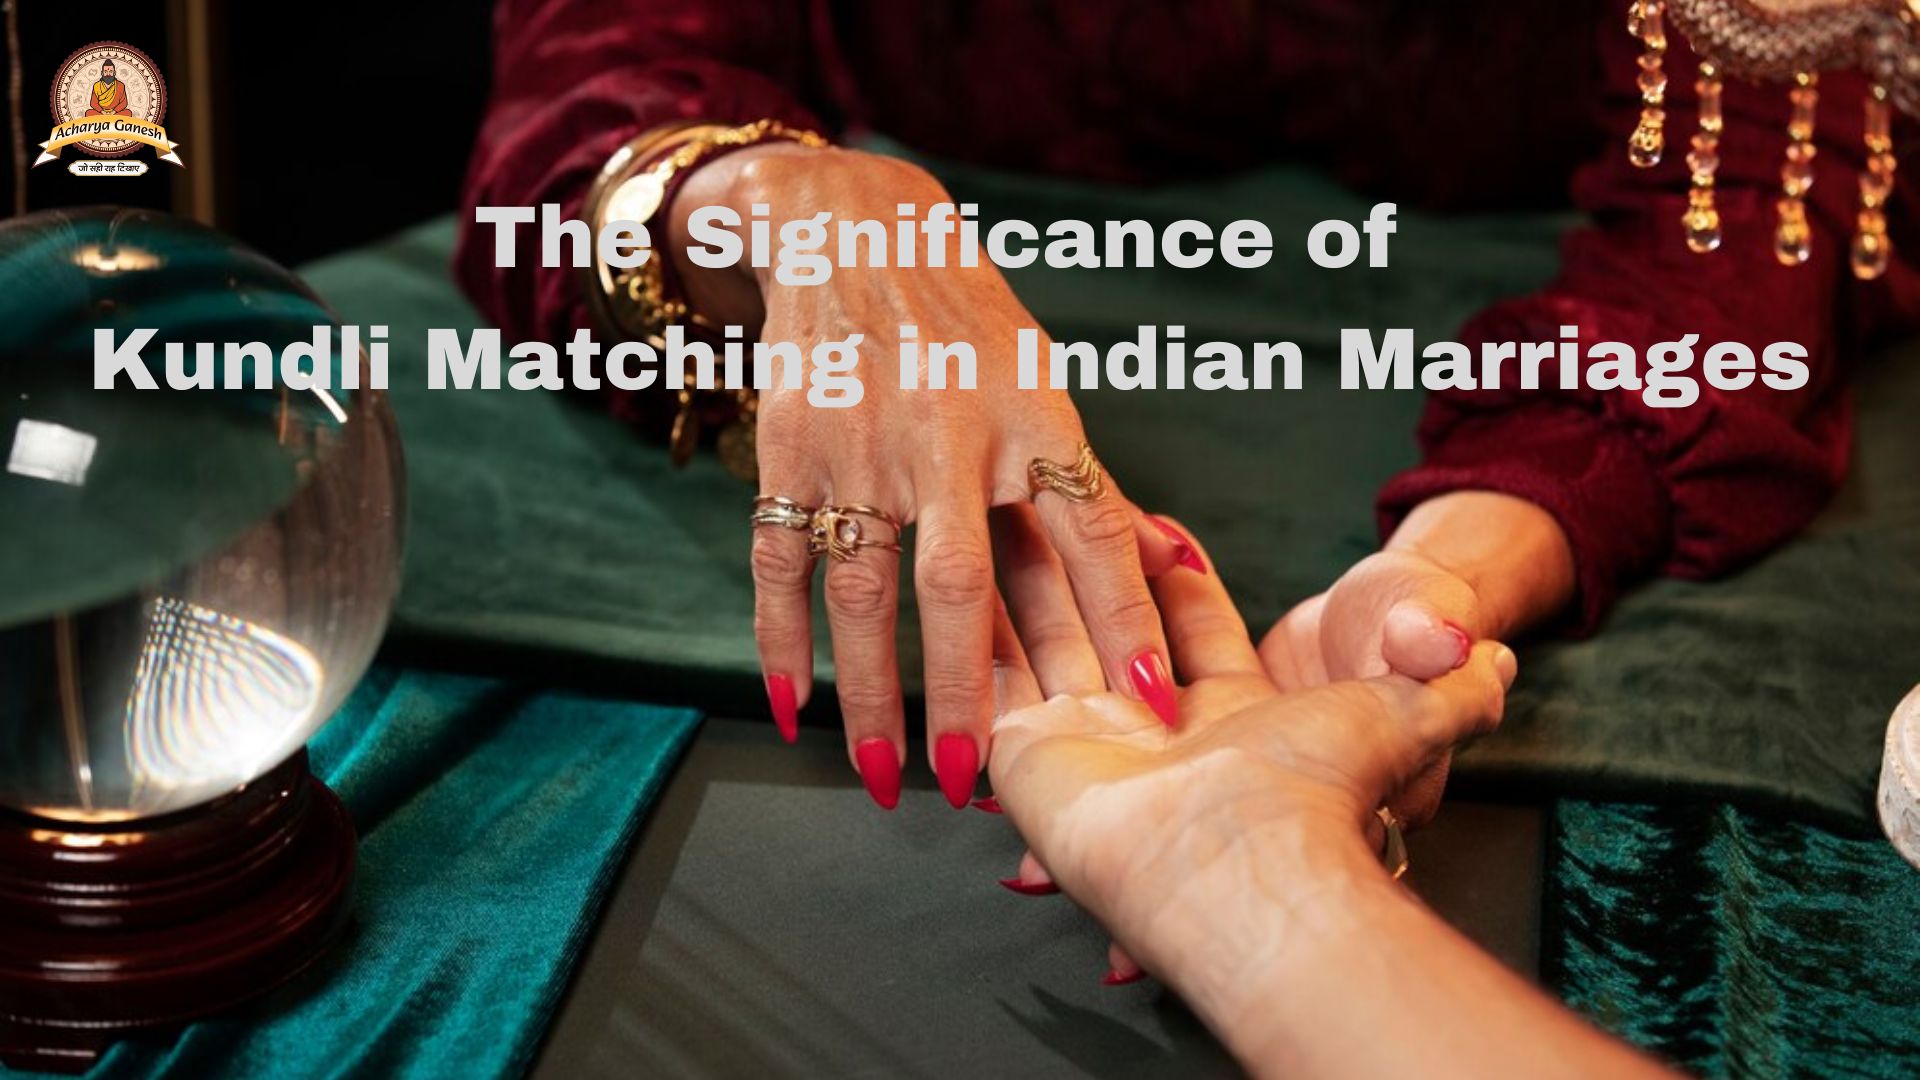 The Significance of Kundli Matching in Indian Marriages - Uttar Pradesh - Noida ID1522210